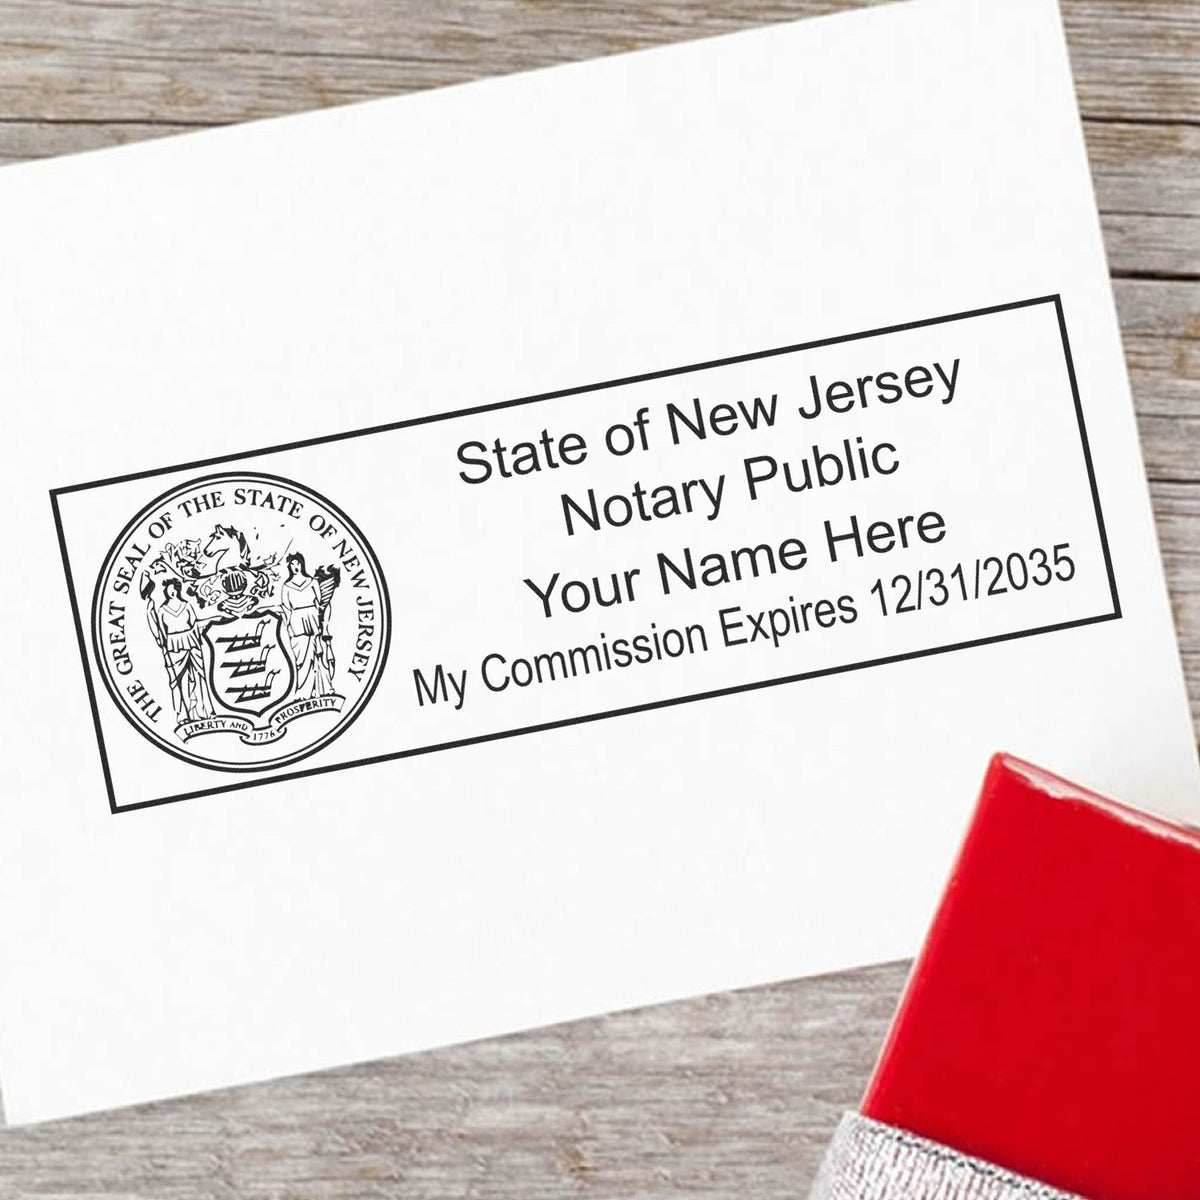 The Slim Pre-Inked State Seal Notary Stamp for New Jersey stamp impression comes to life with a crisp, detailed photo on paper - showcasing true professional quality.